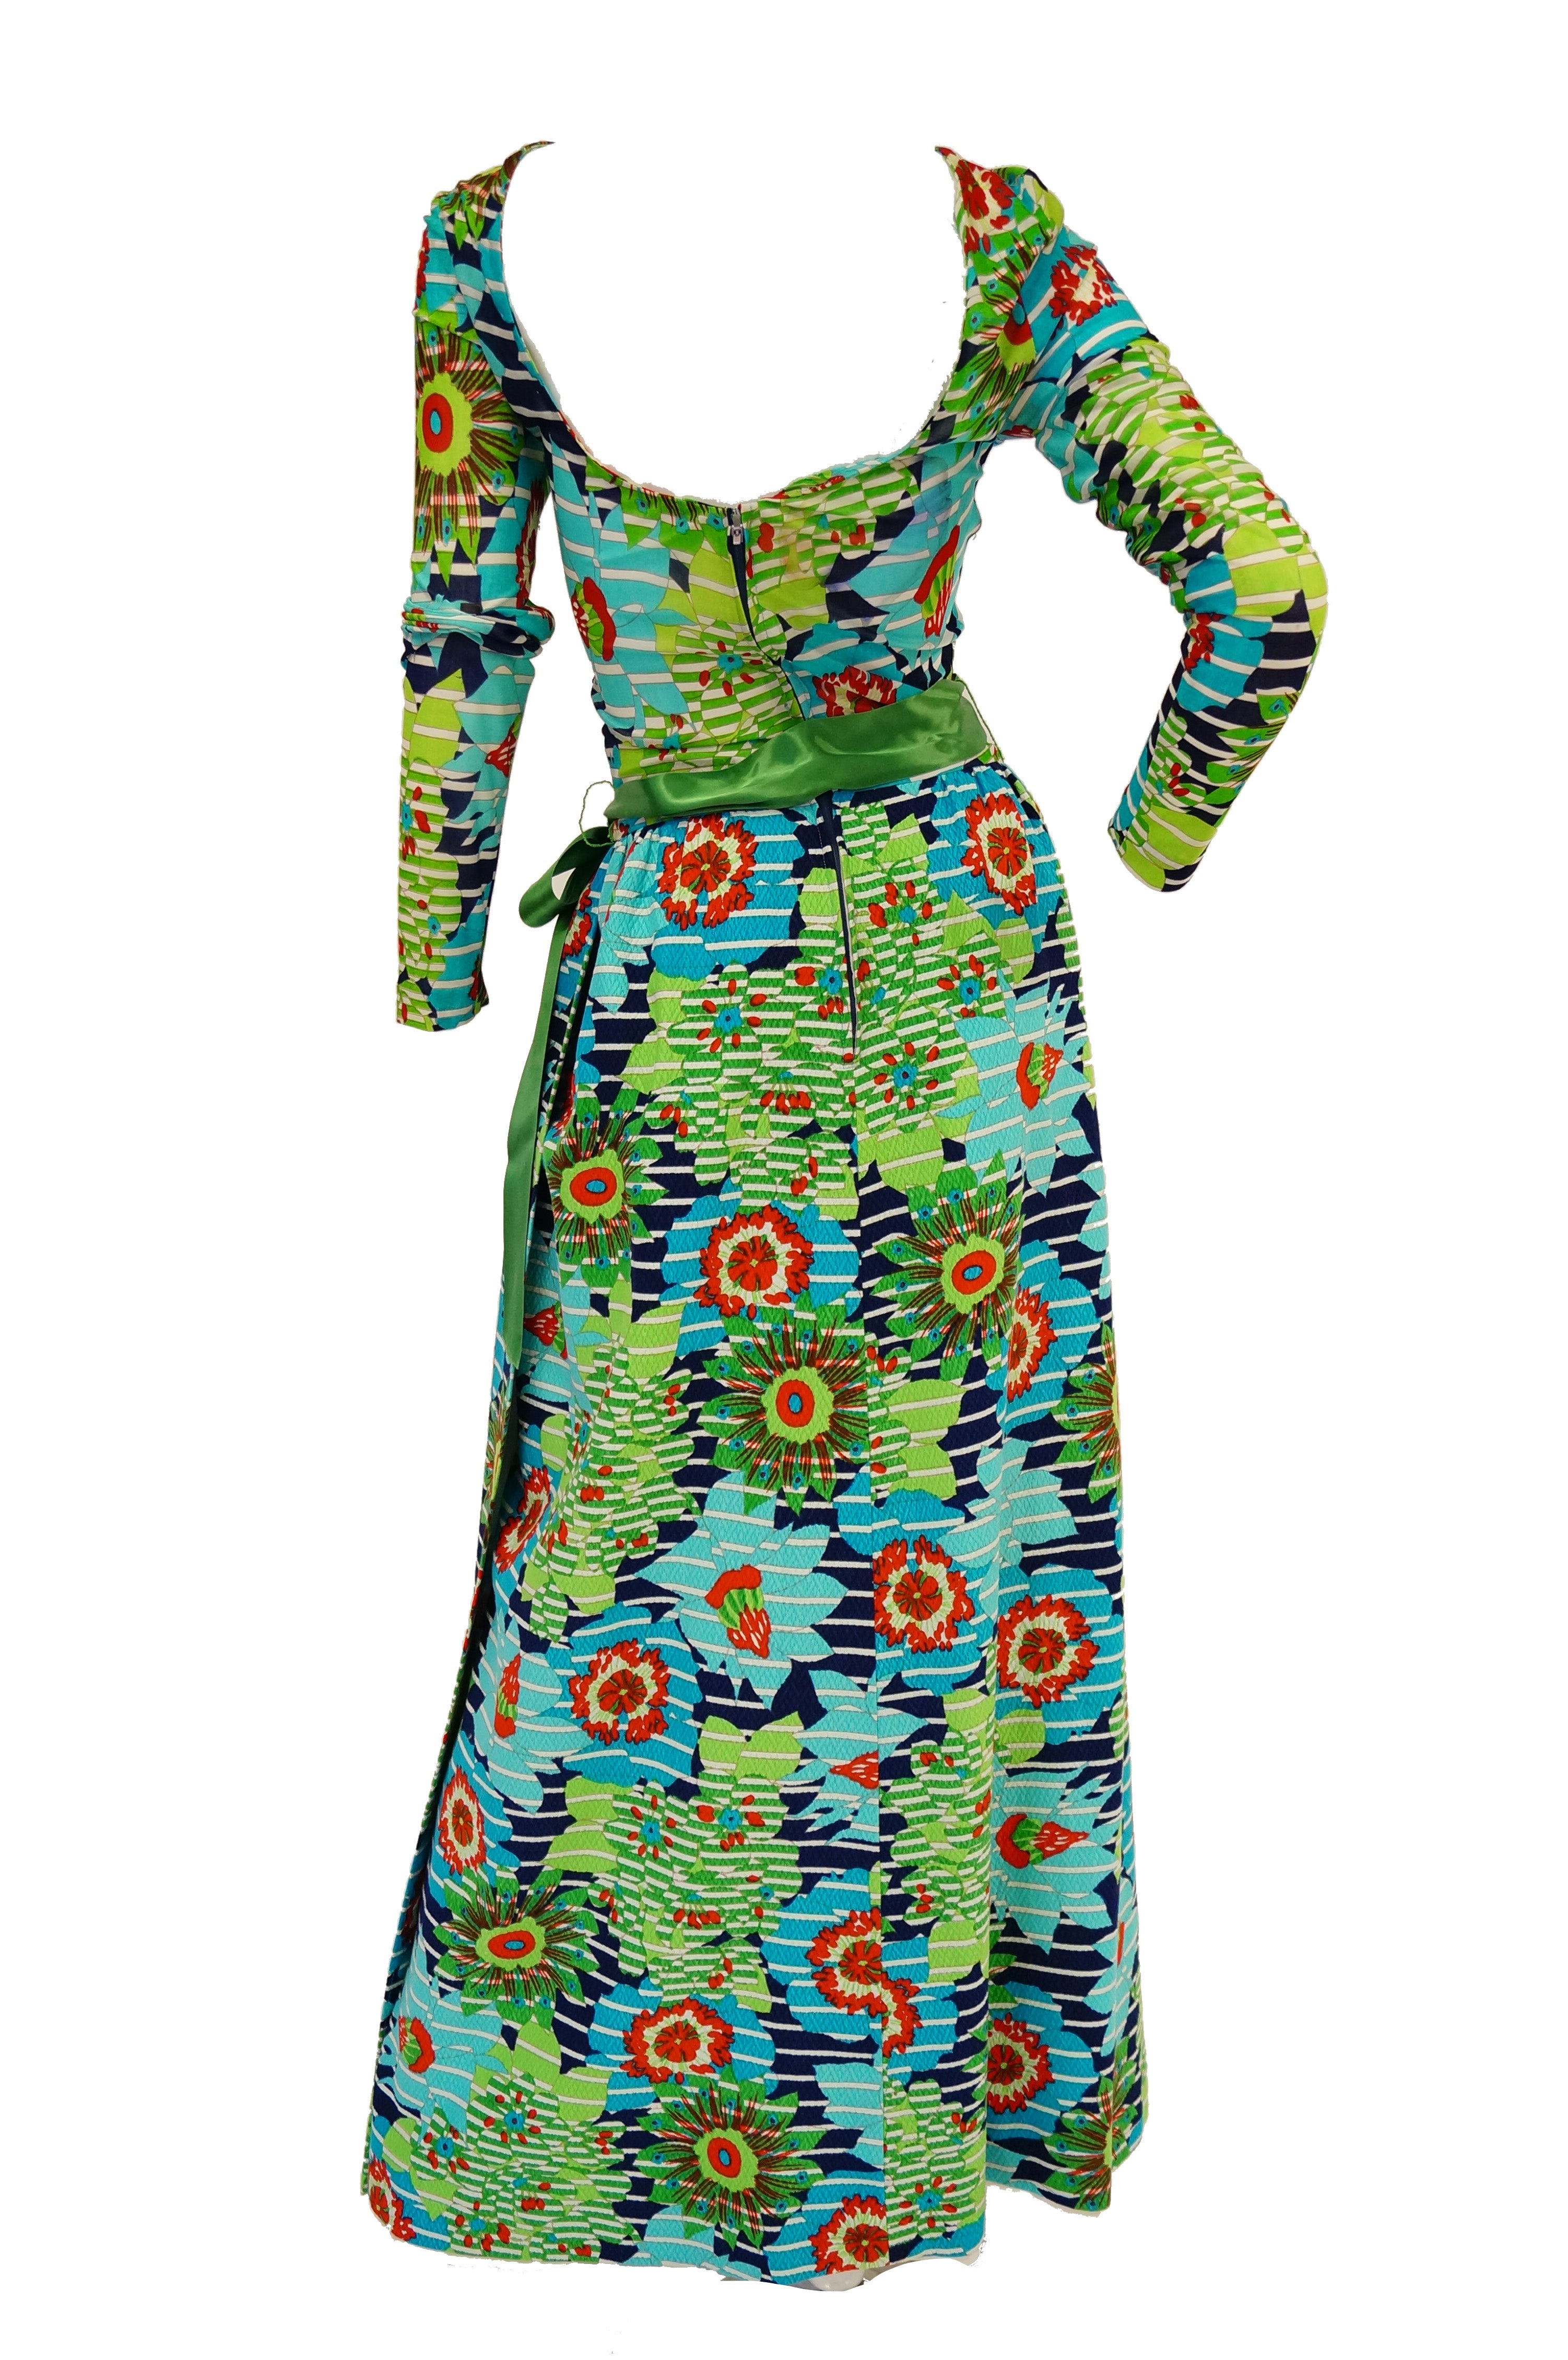 1970s Lanvin Vibrant Green and Blue Floral Dress w/ Sheer Bodice